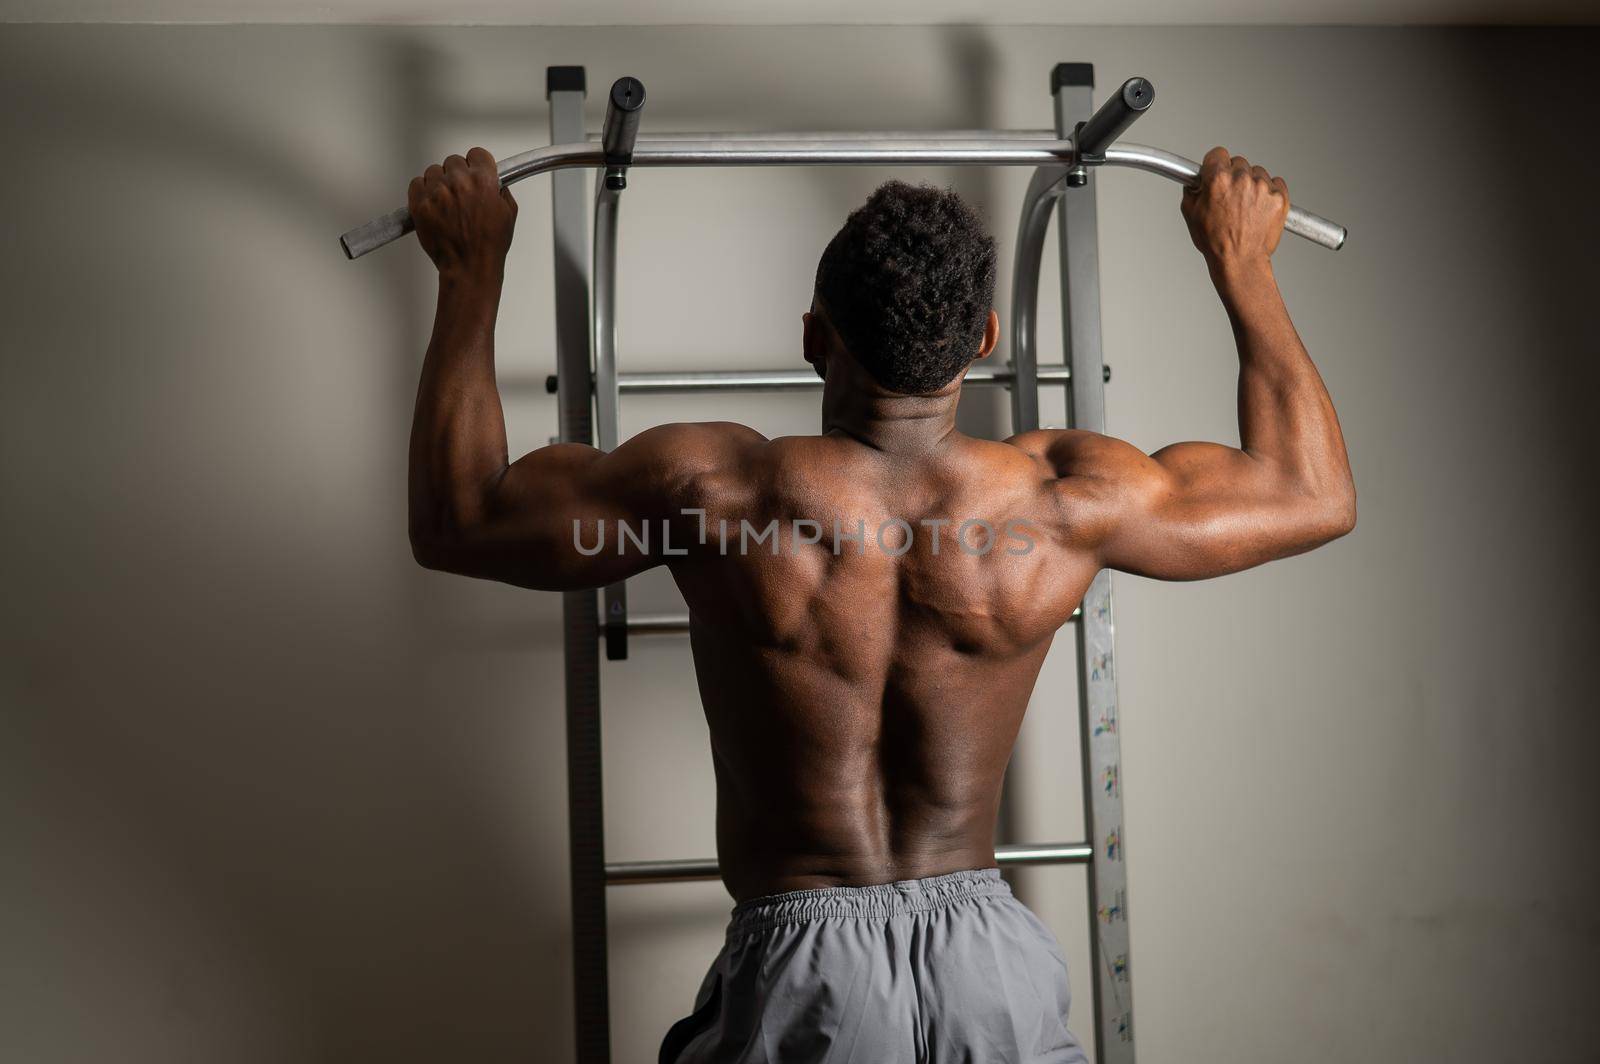 African american man with naked torso pulls up on horizontal bar in gym. by mrwed54